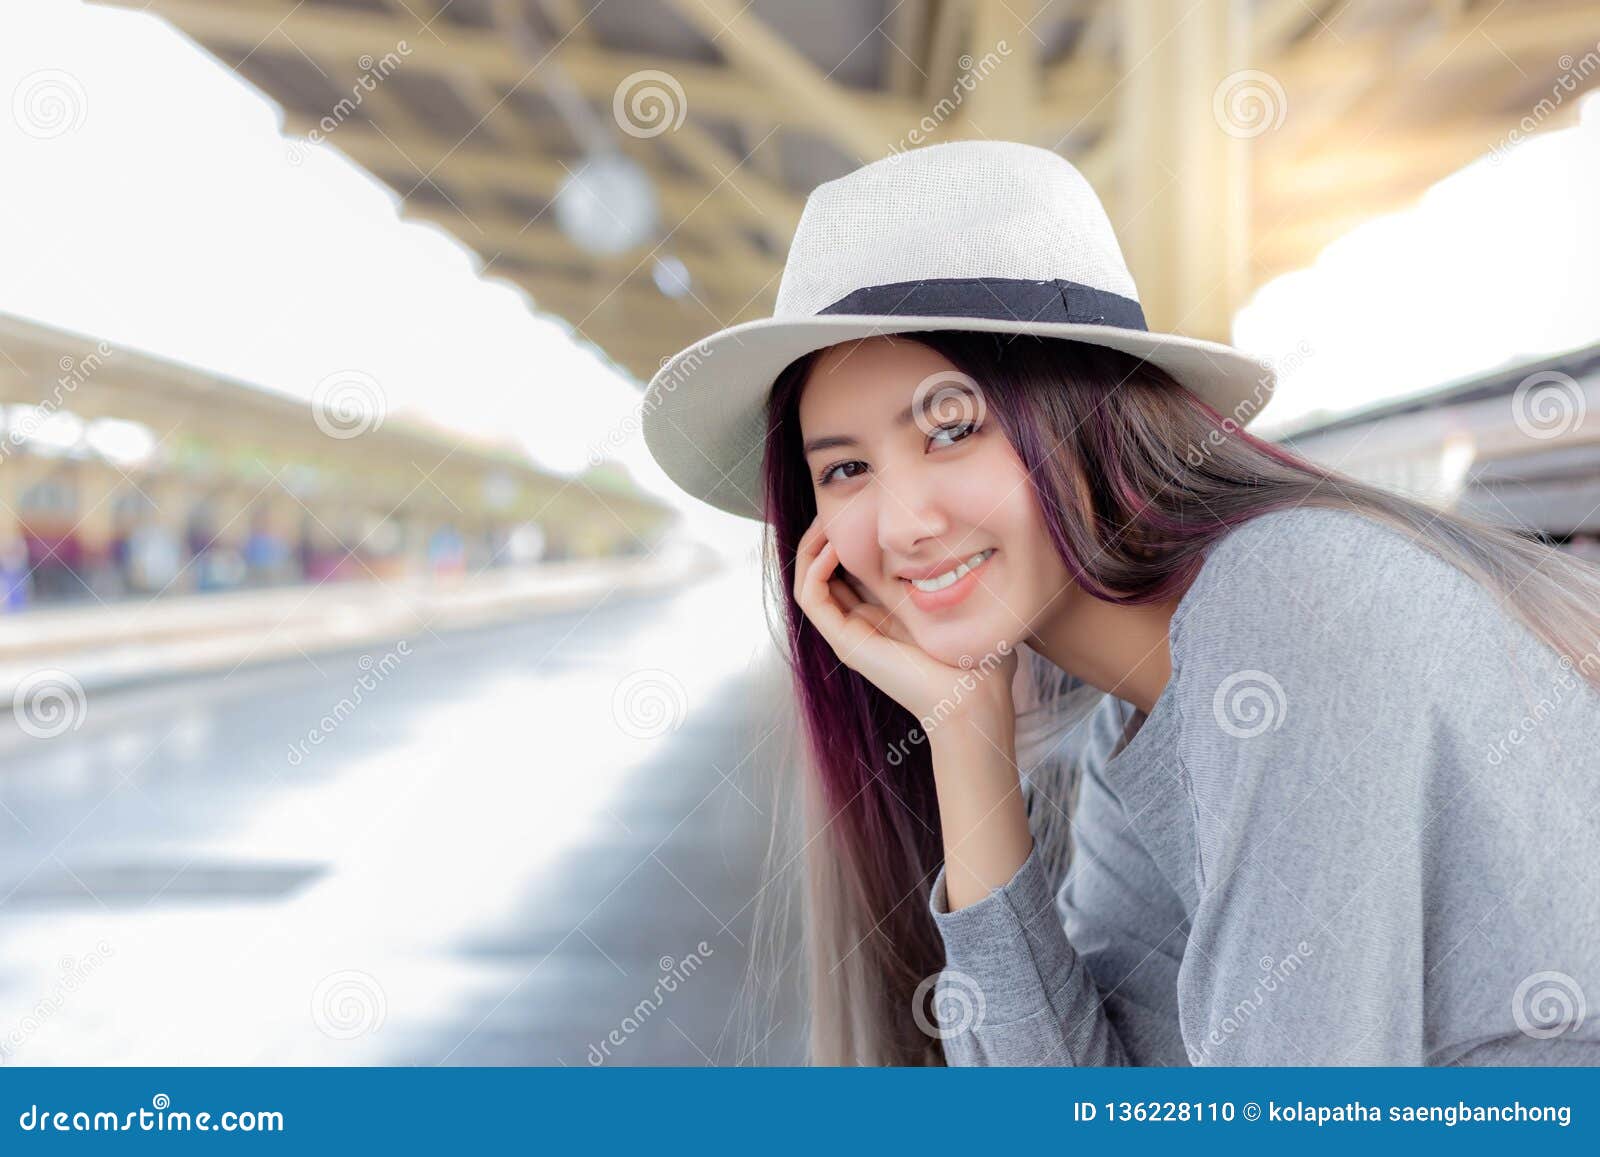 attractive beautiful woman is waiting train for traveling around the city.